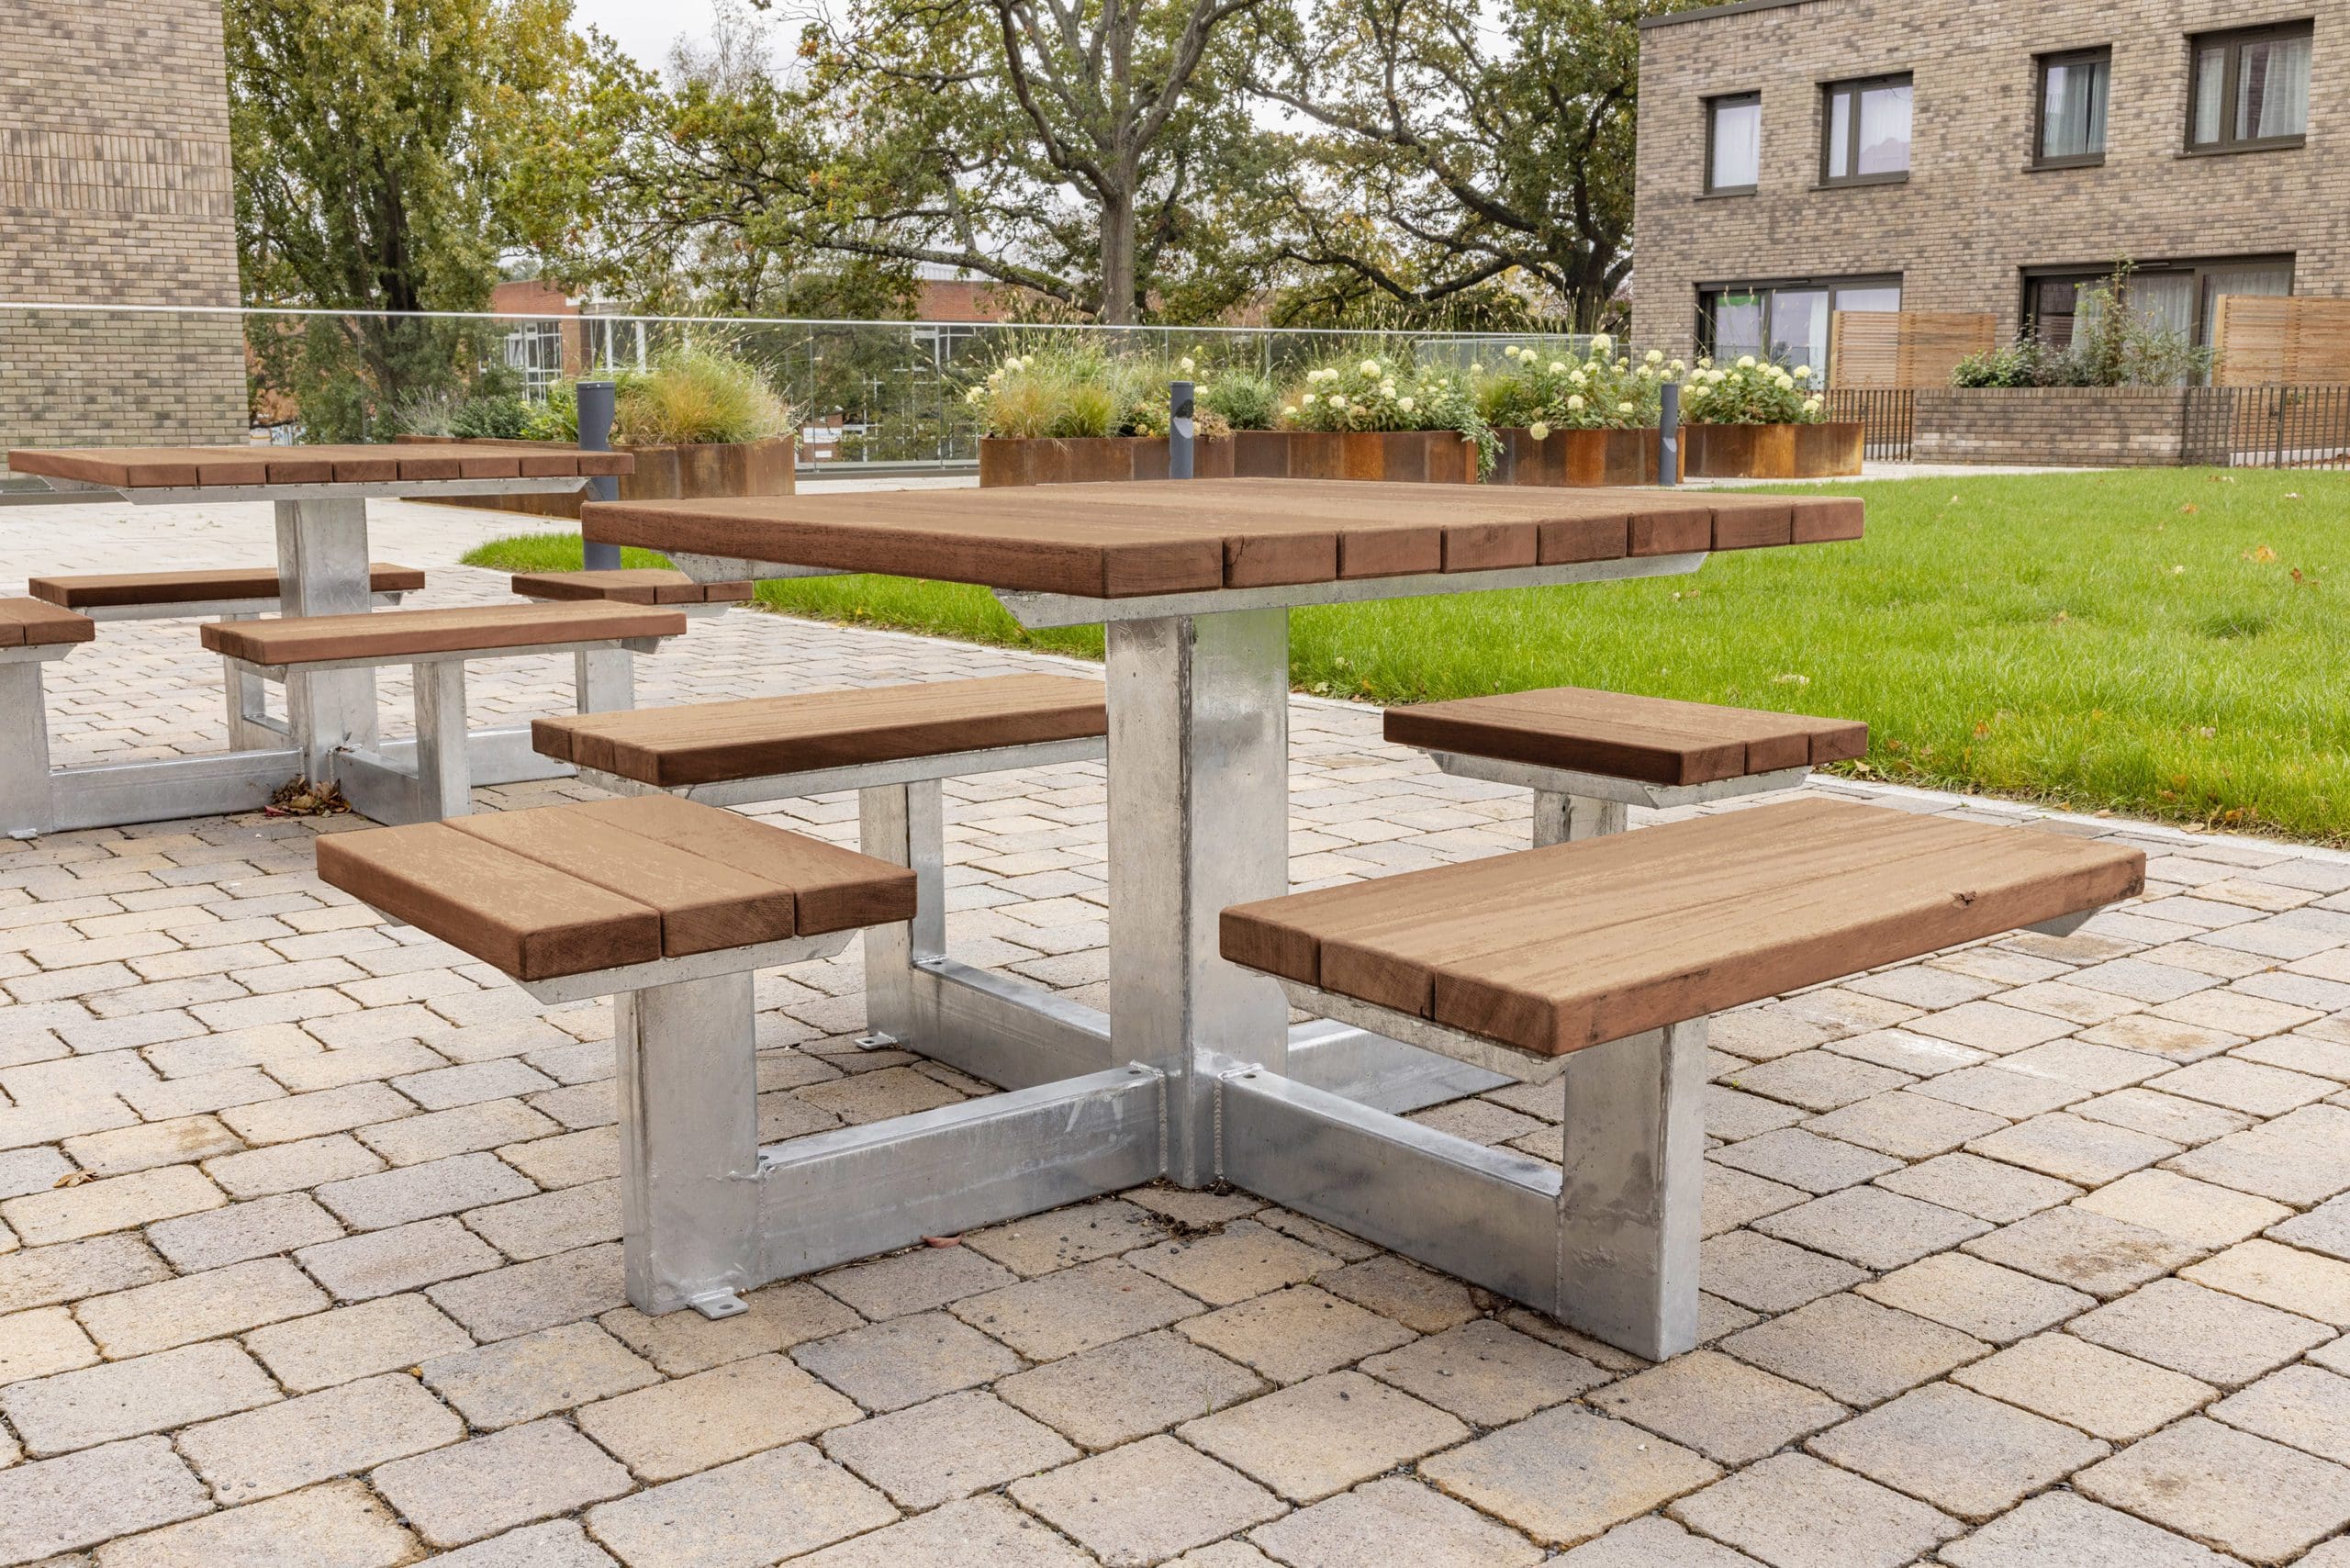 exterior-square-wooden-picnic-table-with-attached-square-seats